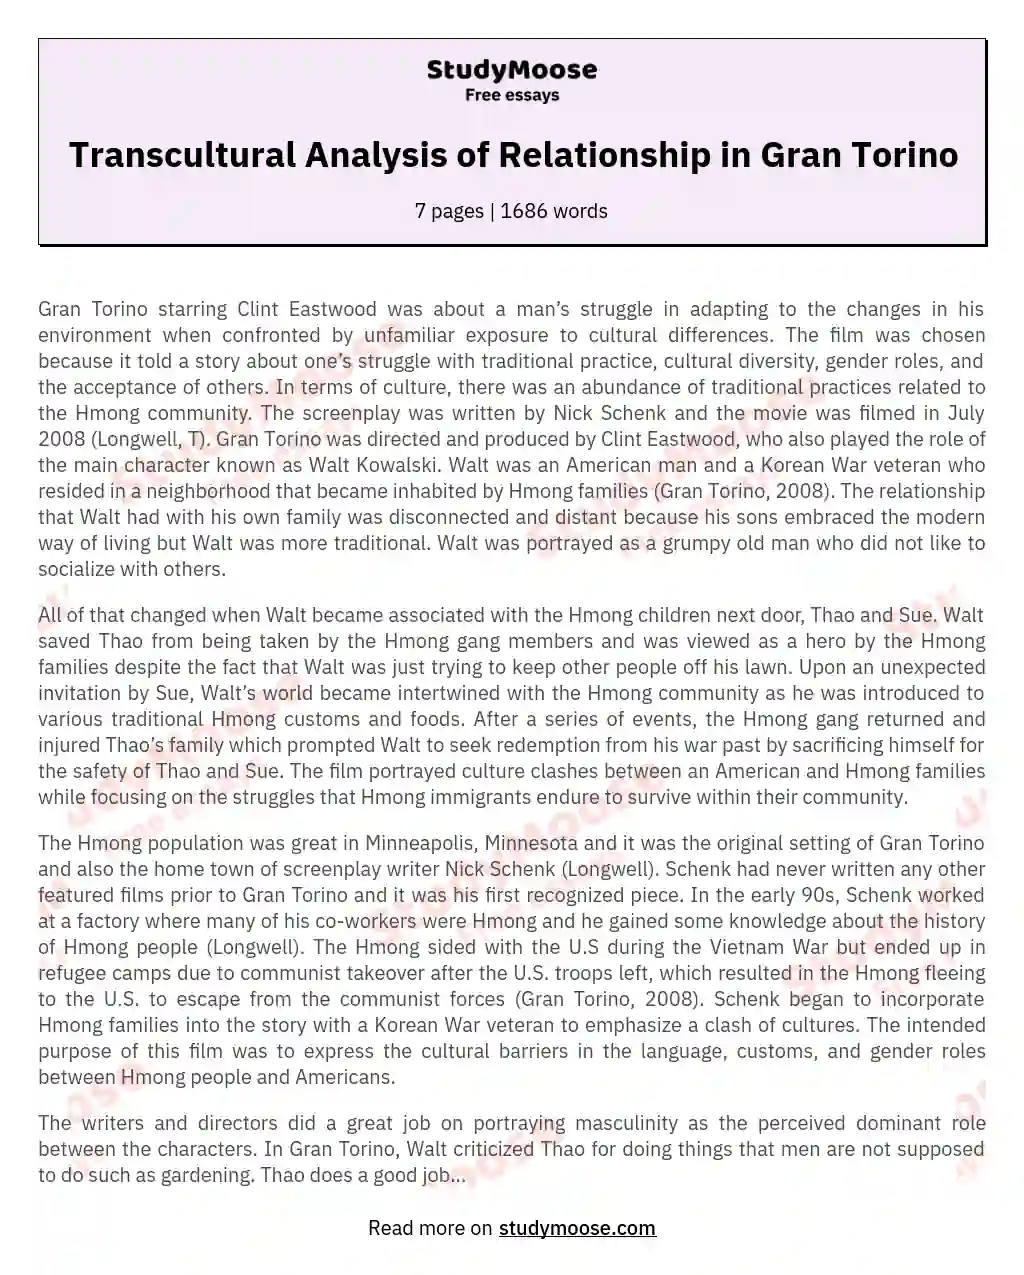 Transcultural Analysis of Relationship in Gran Torino essay